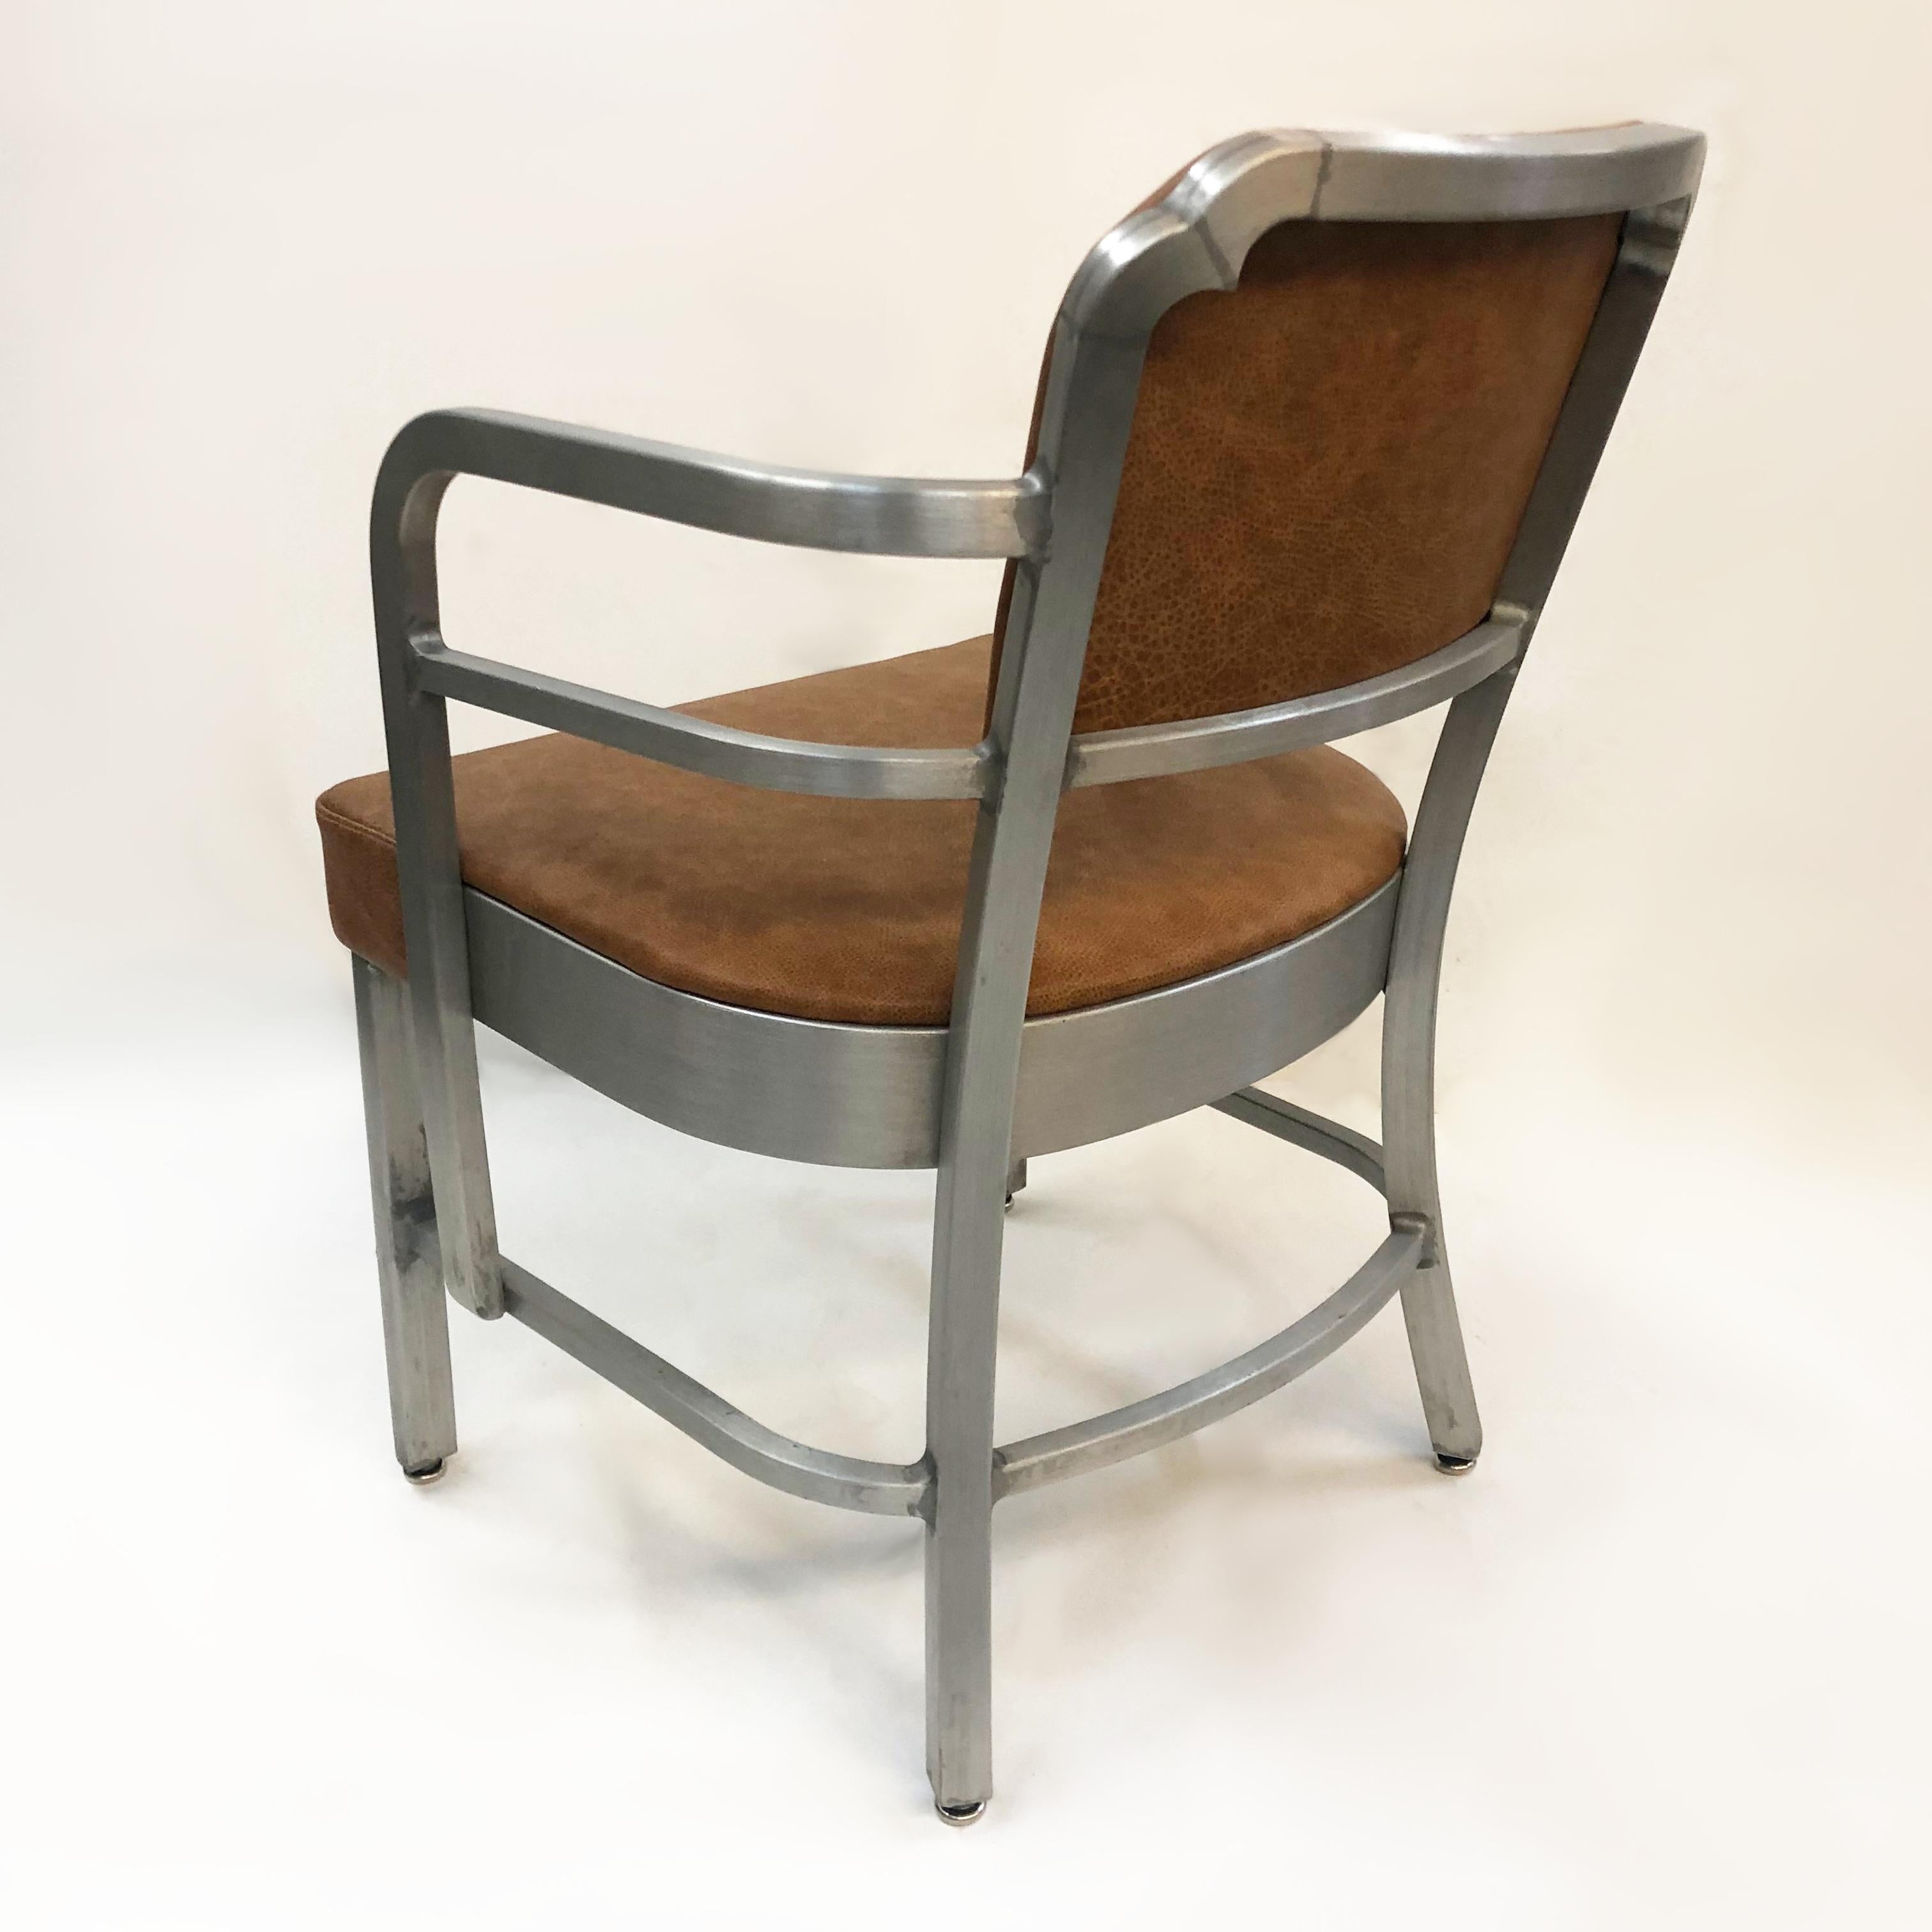 Mid-20th Century Rare Pair of Art Deco Industrial Aluminum & Leather Club Arm Chairs by GoodForm For Sale